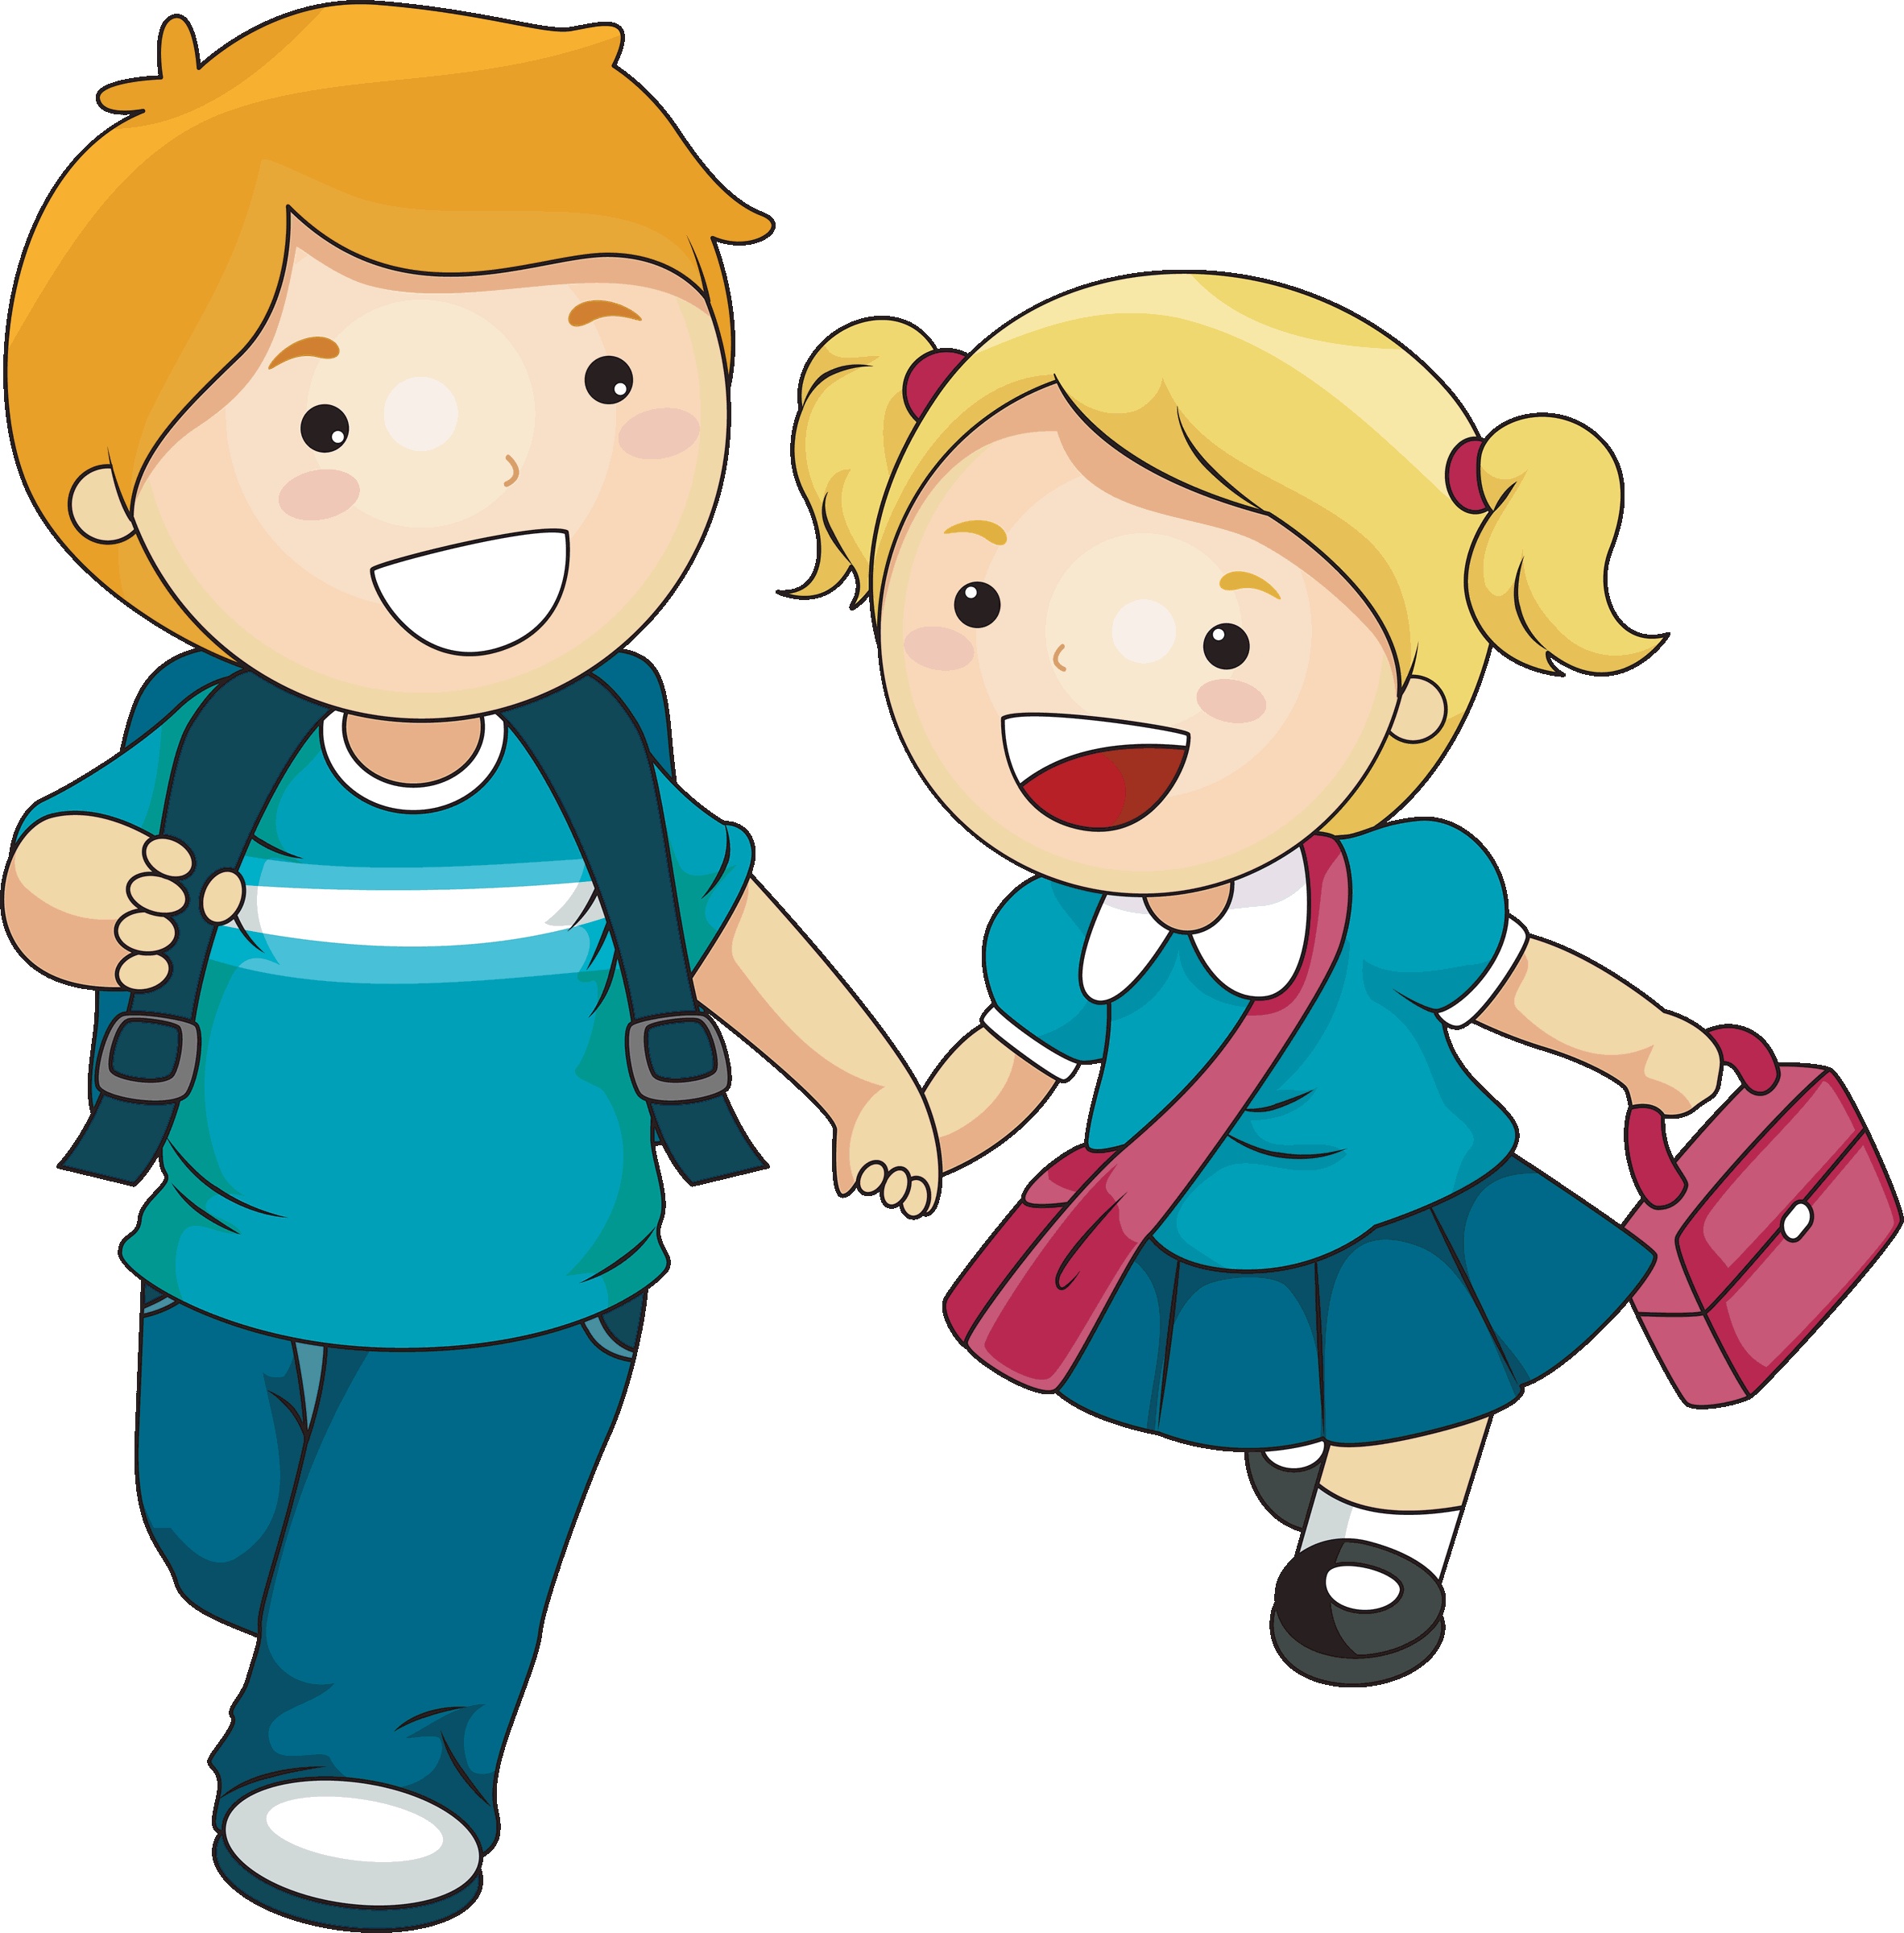 christian back to school clipart - photo #40